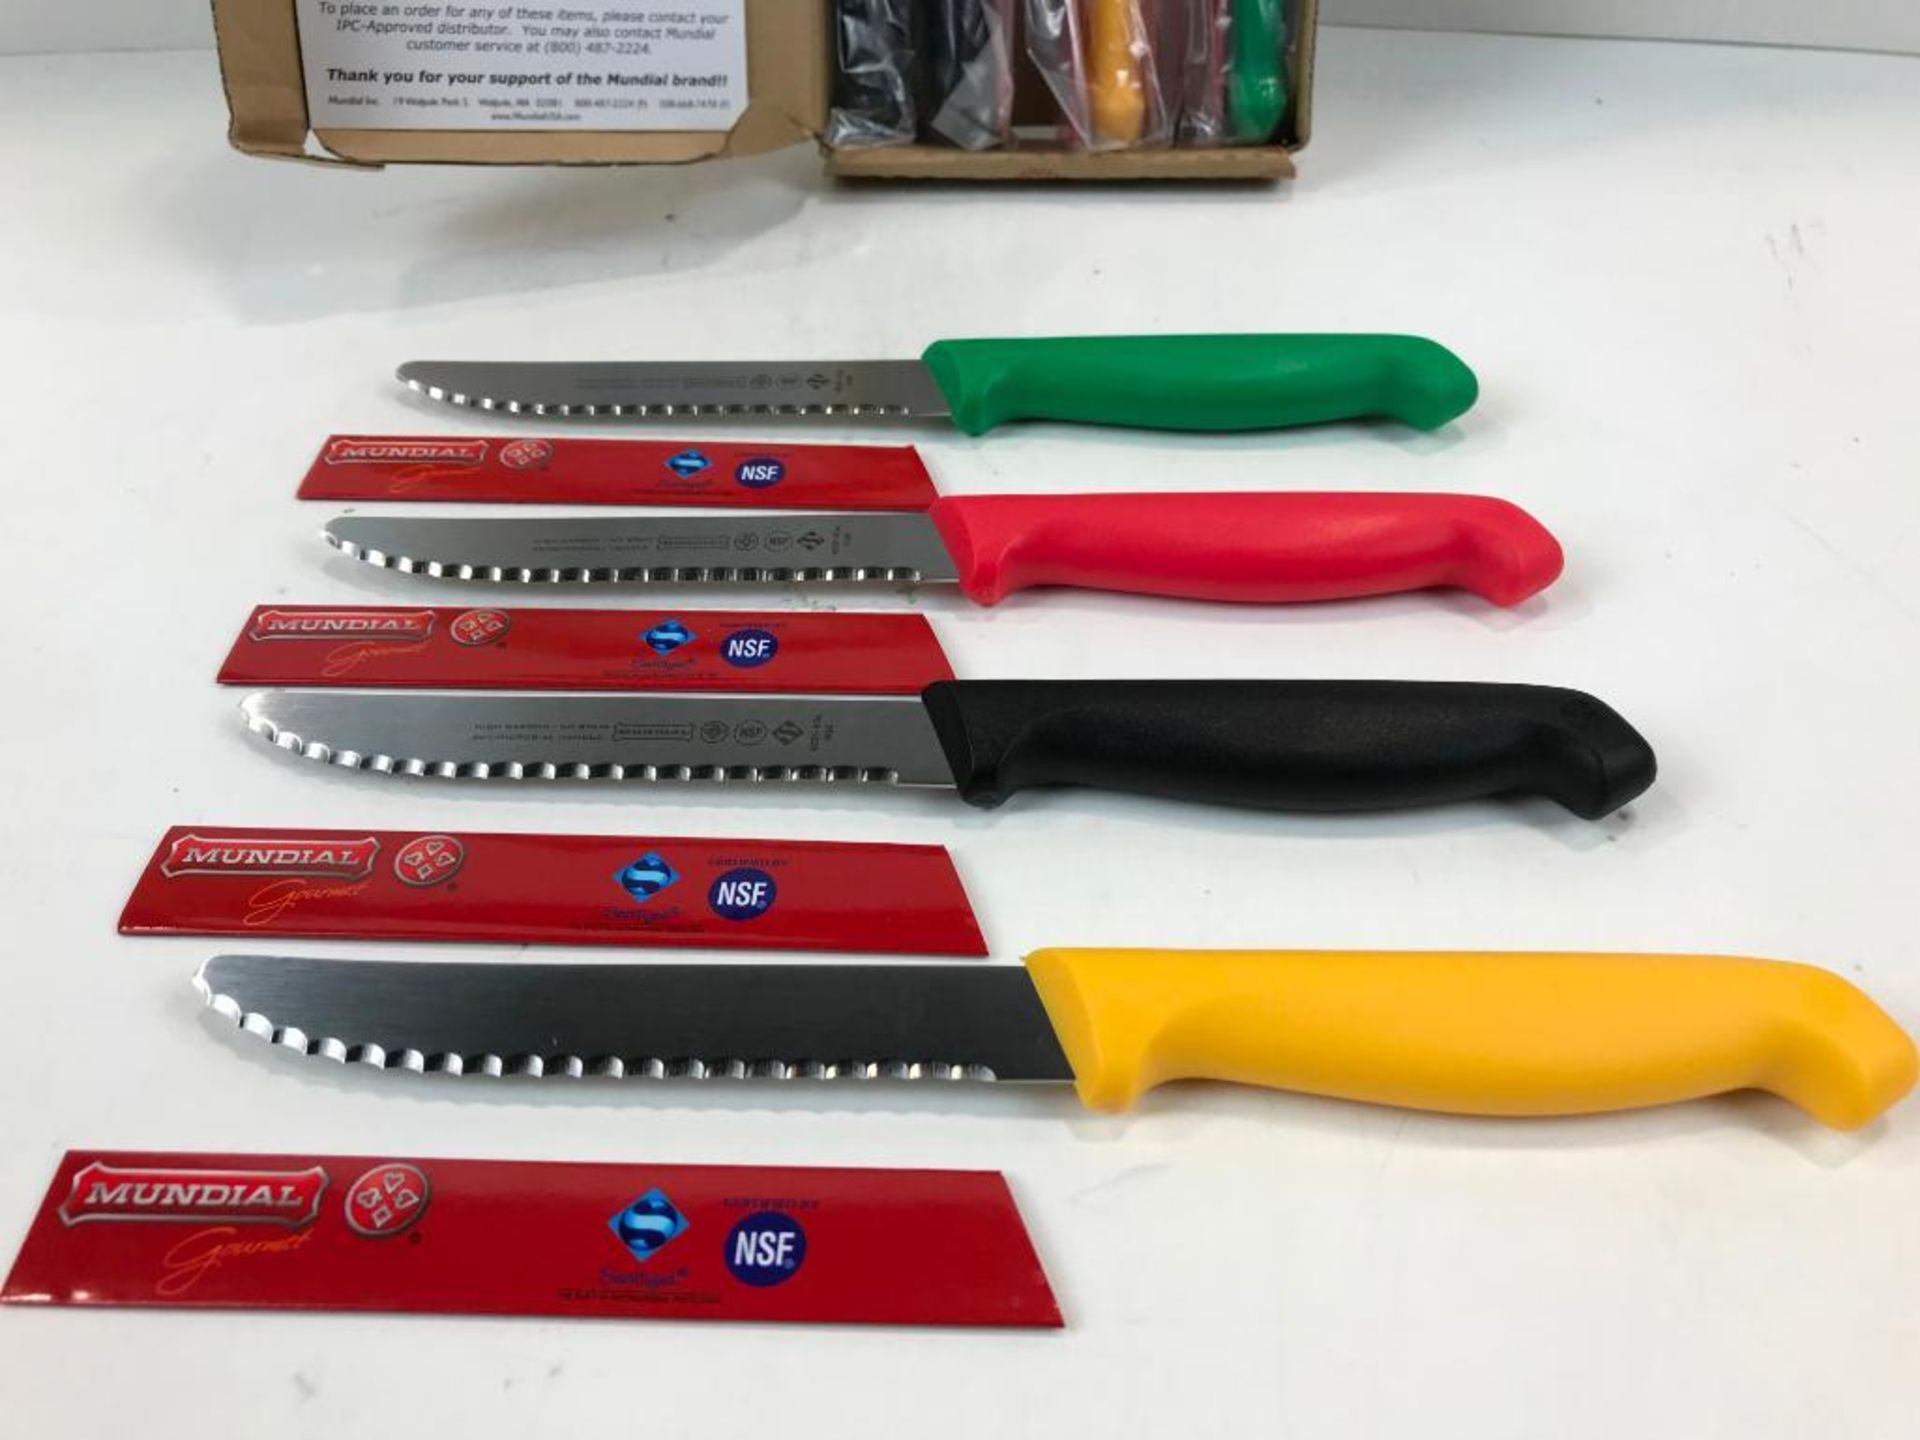 MUNDIAL 4.25" ROUNDED TIP UTILITY KNIFE - LOT OF 12 - 6629-4 1/4 - NEW - Image 5 of 7